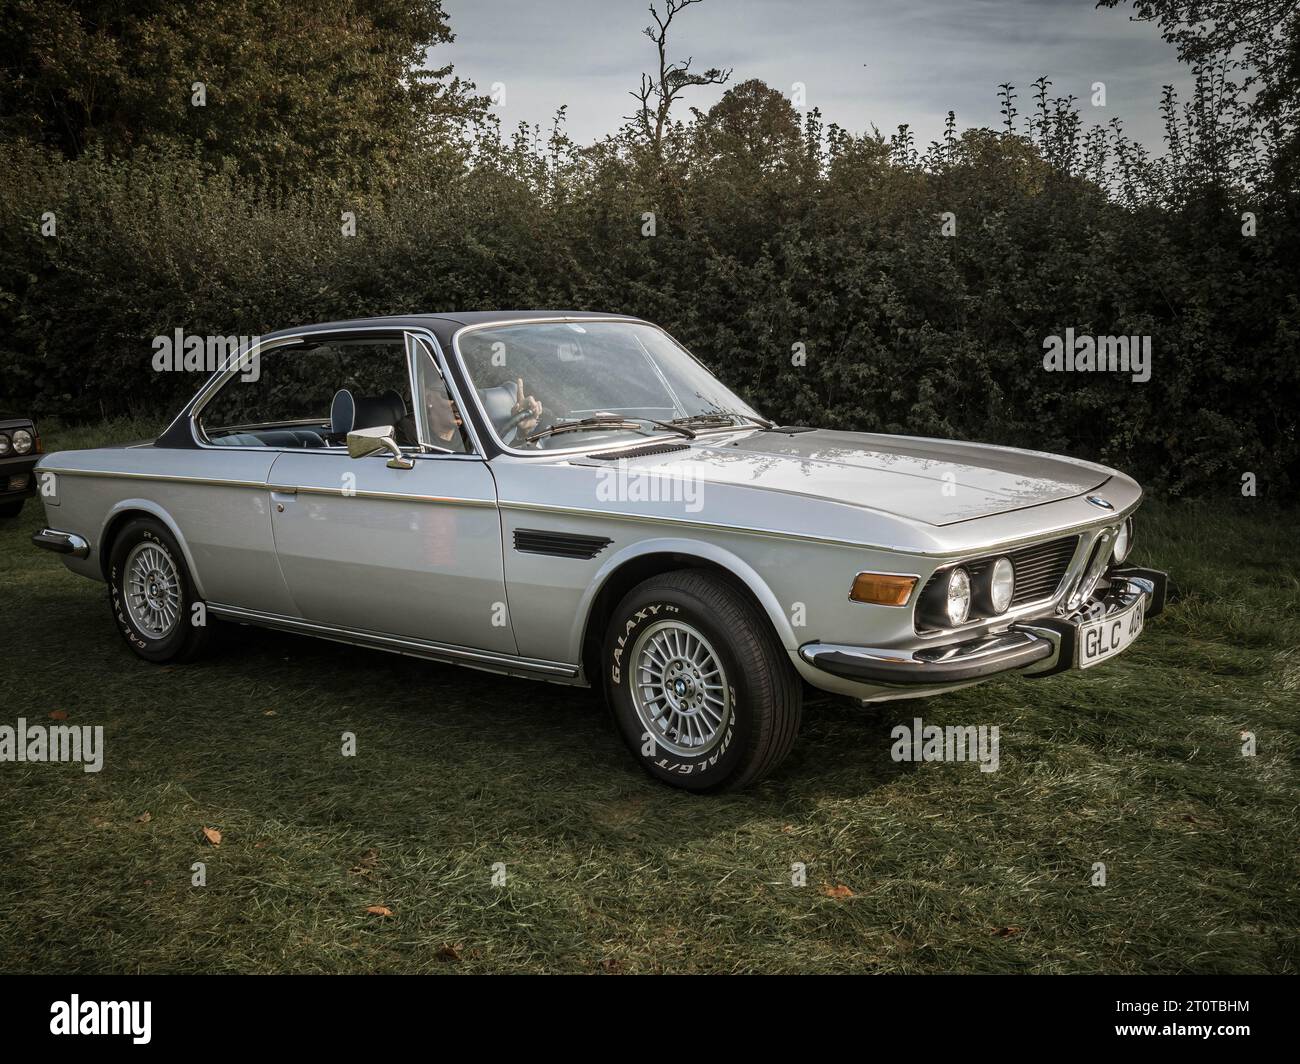 BMW 3.0 CSI at a car show in Oxfordshire Stock Photo